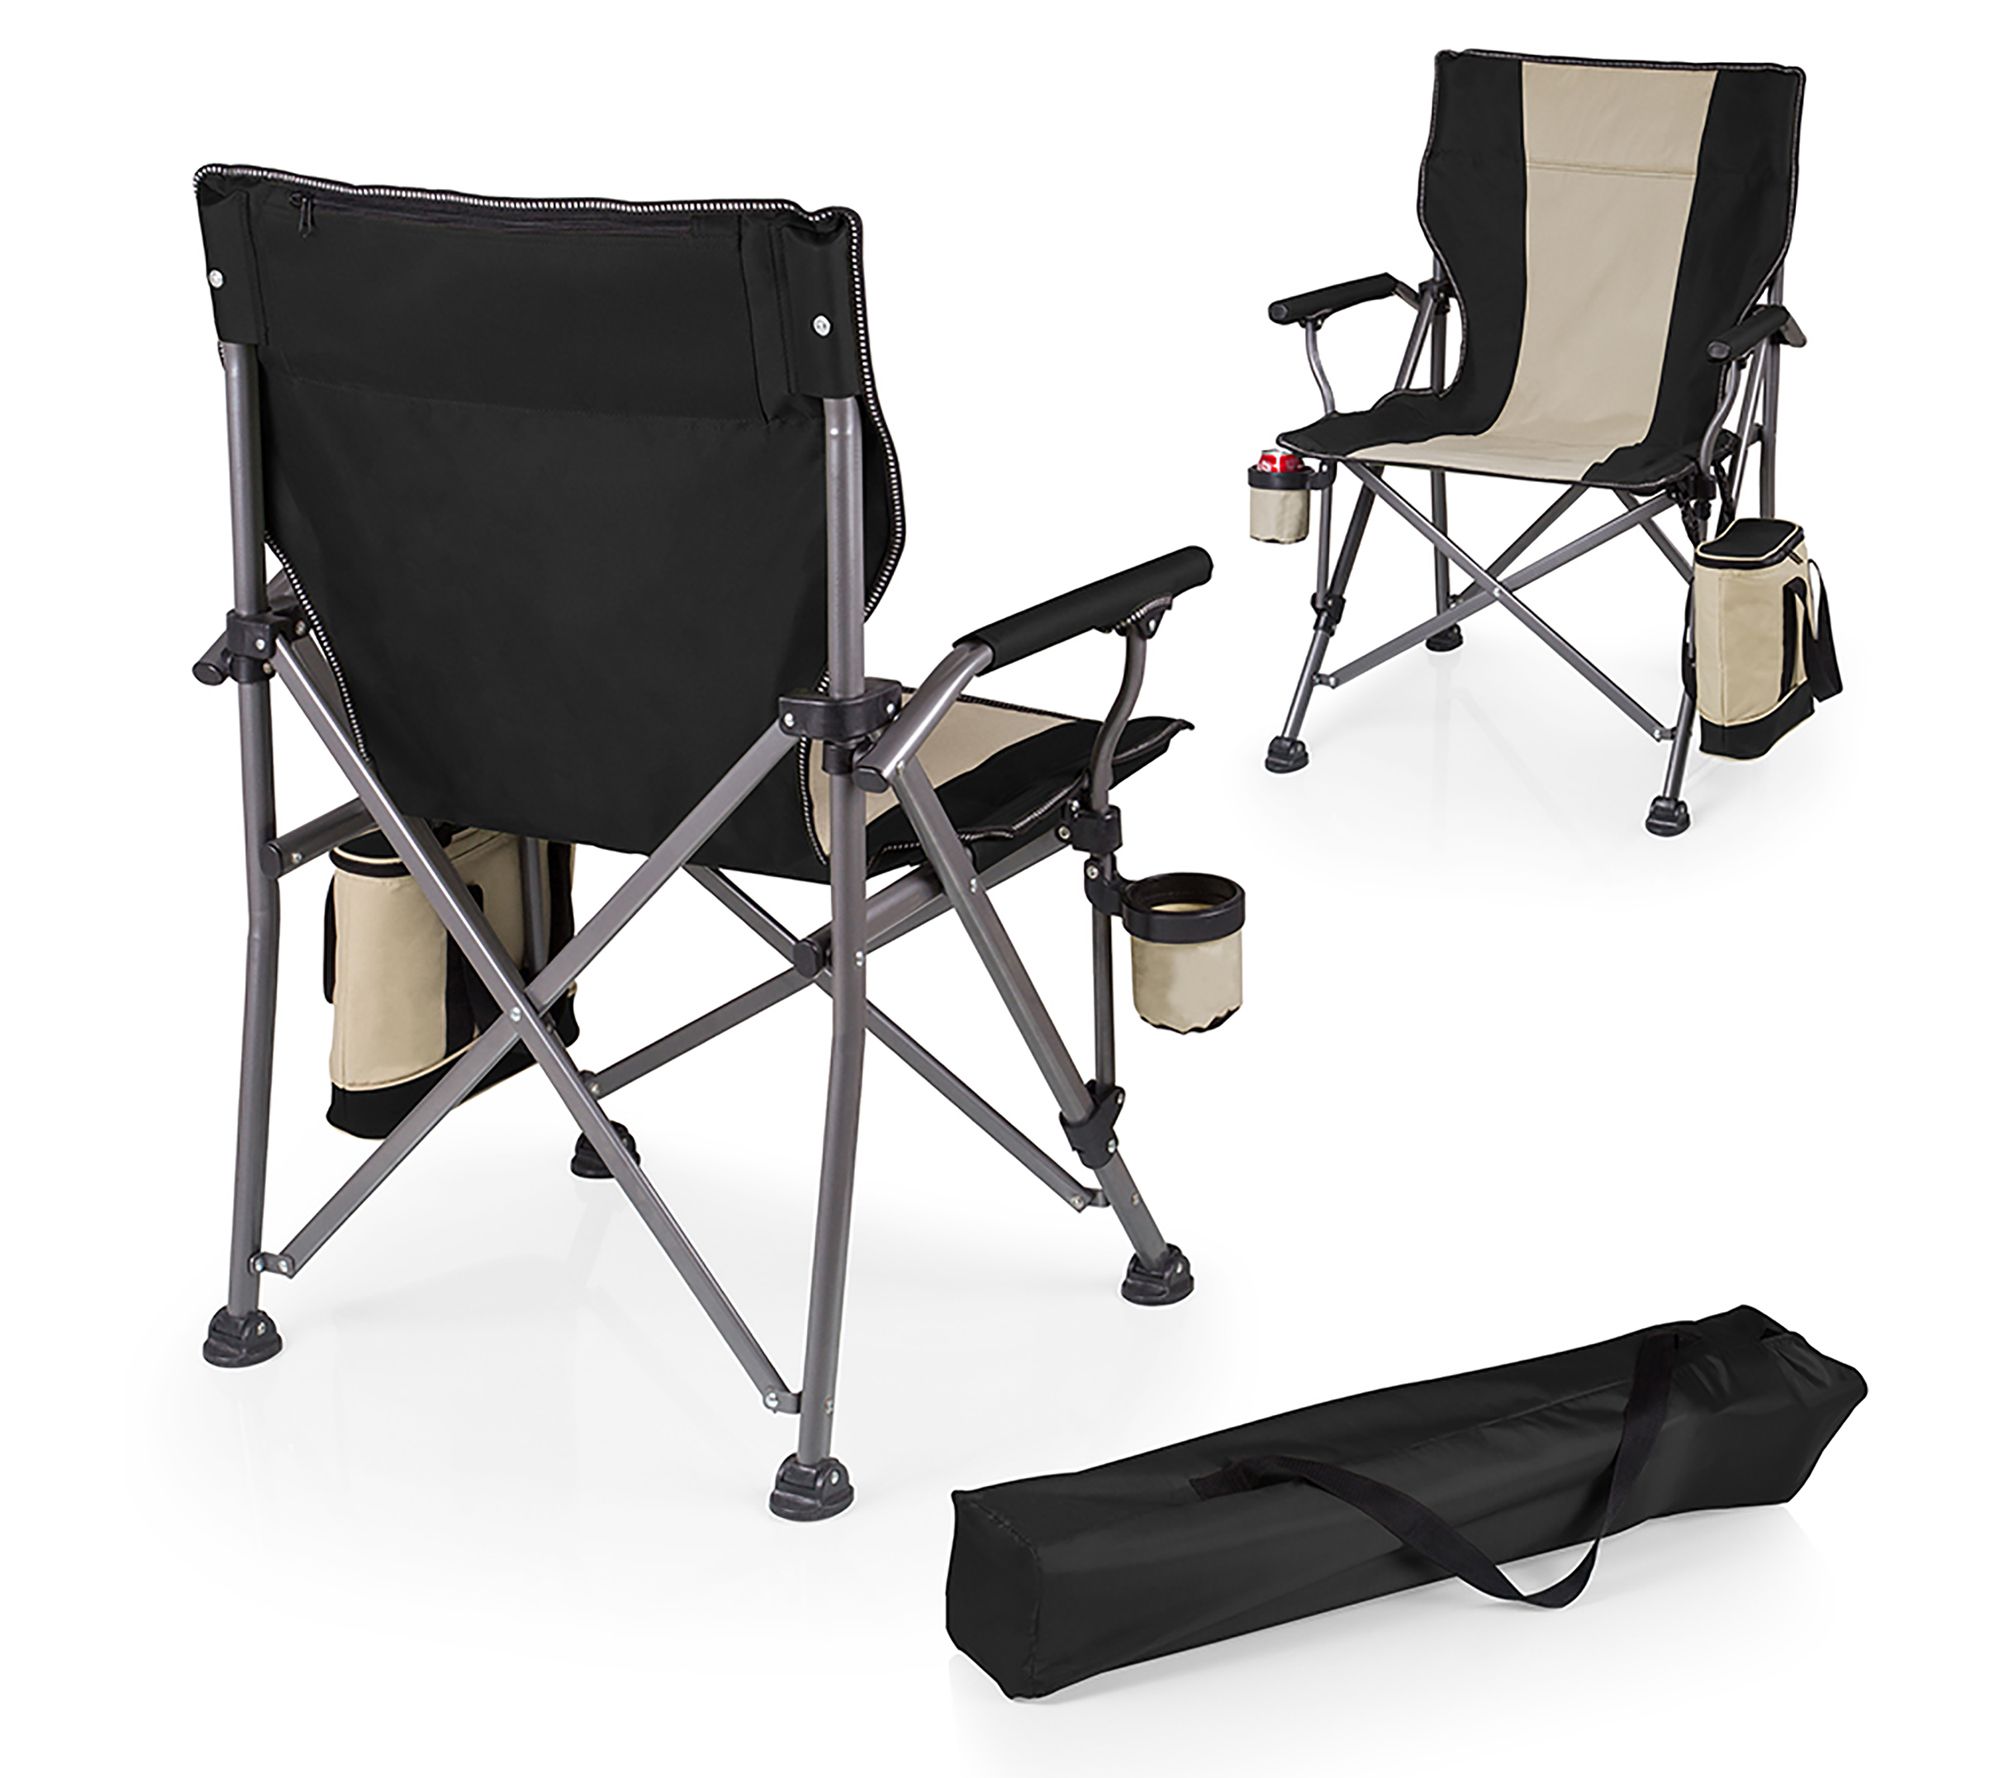 ONIVA a Picnic Time brand Campsite Portable Folding Chair